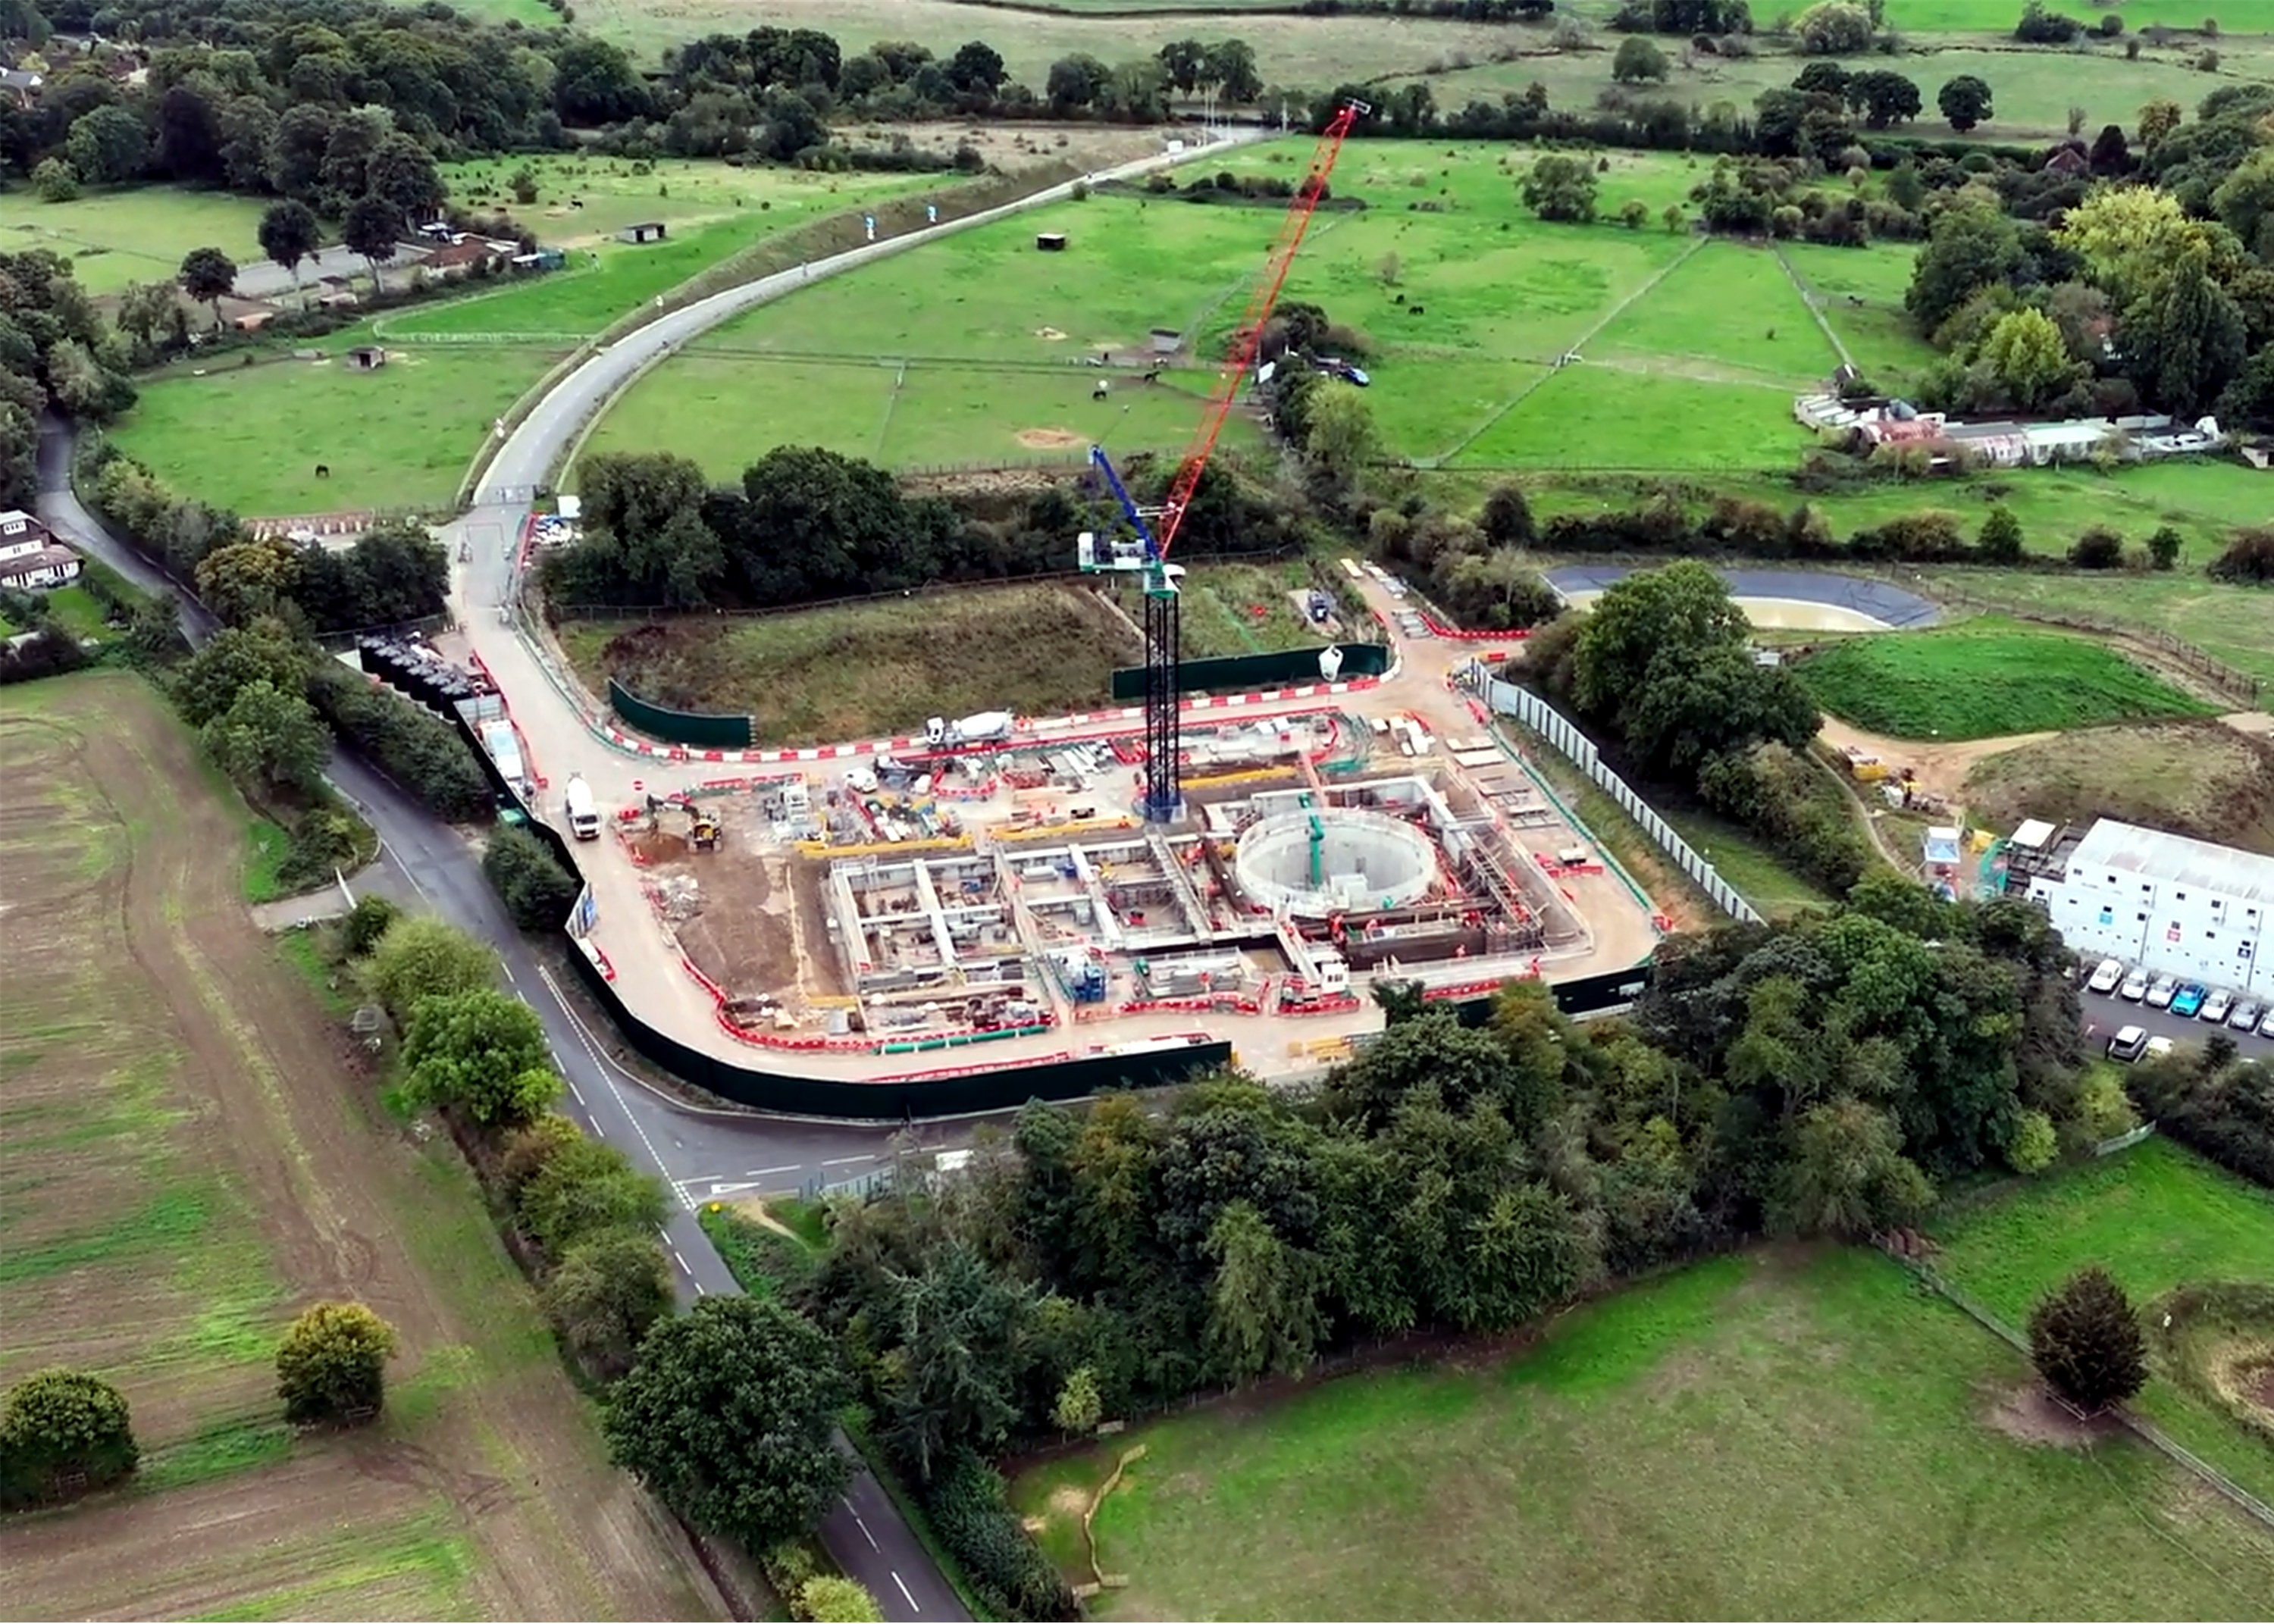  Frame from HS2 C1 shaft drone footage of Chalfont St Peter shaft in September 2022